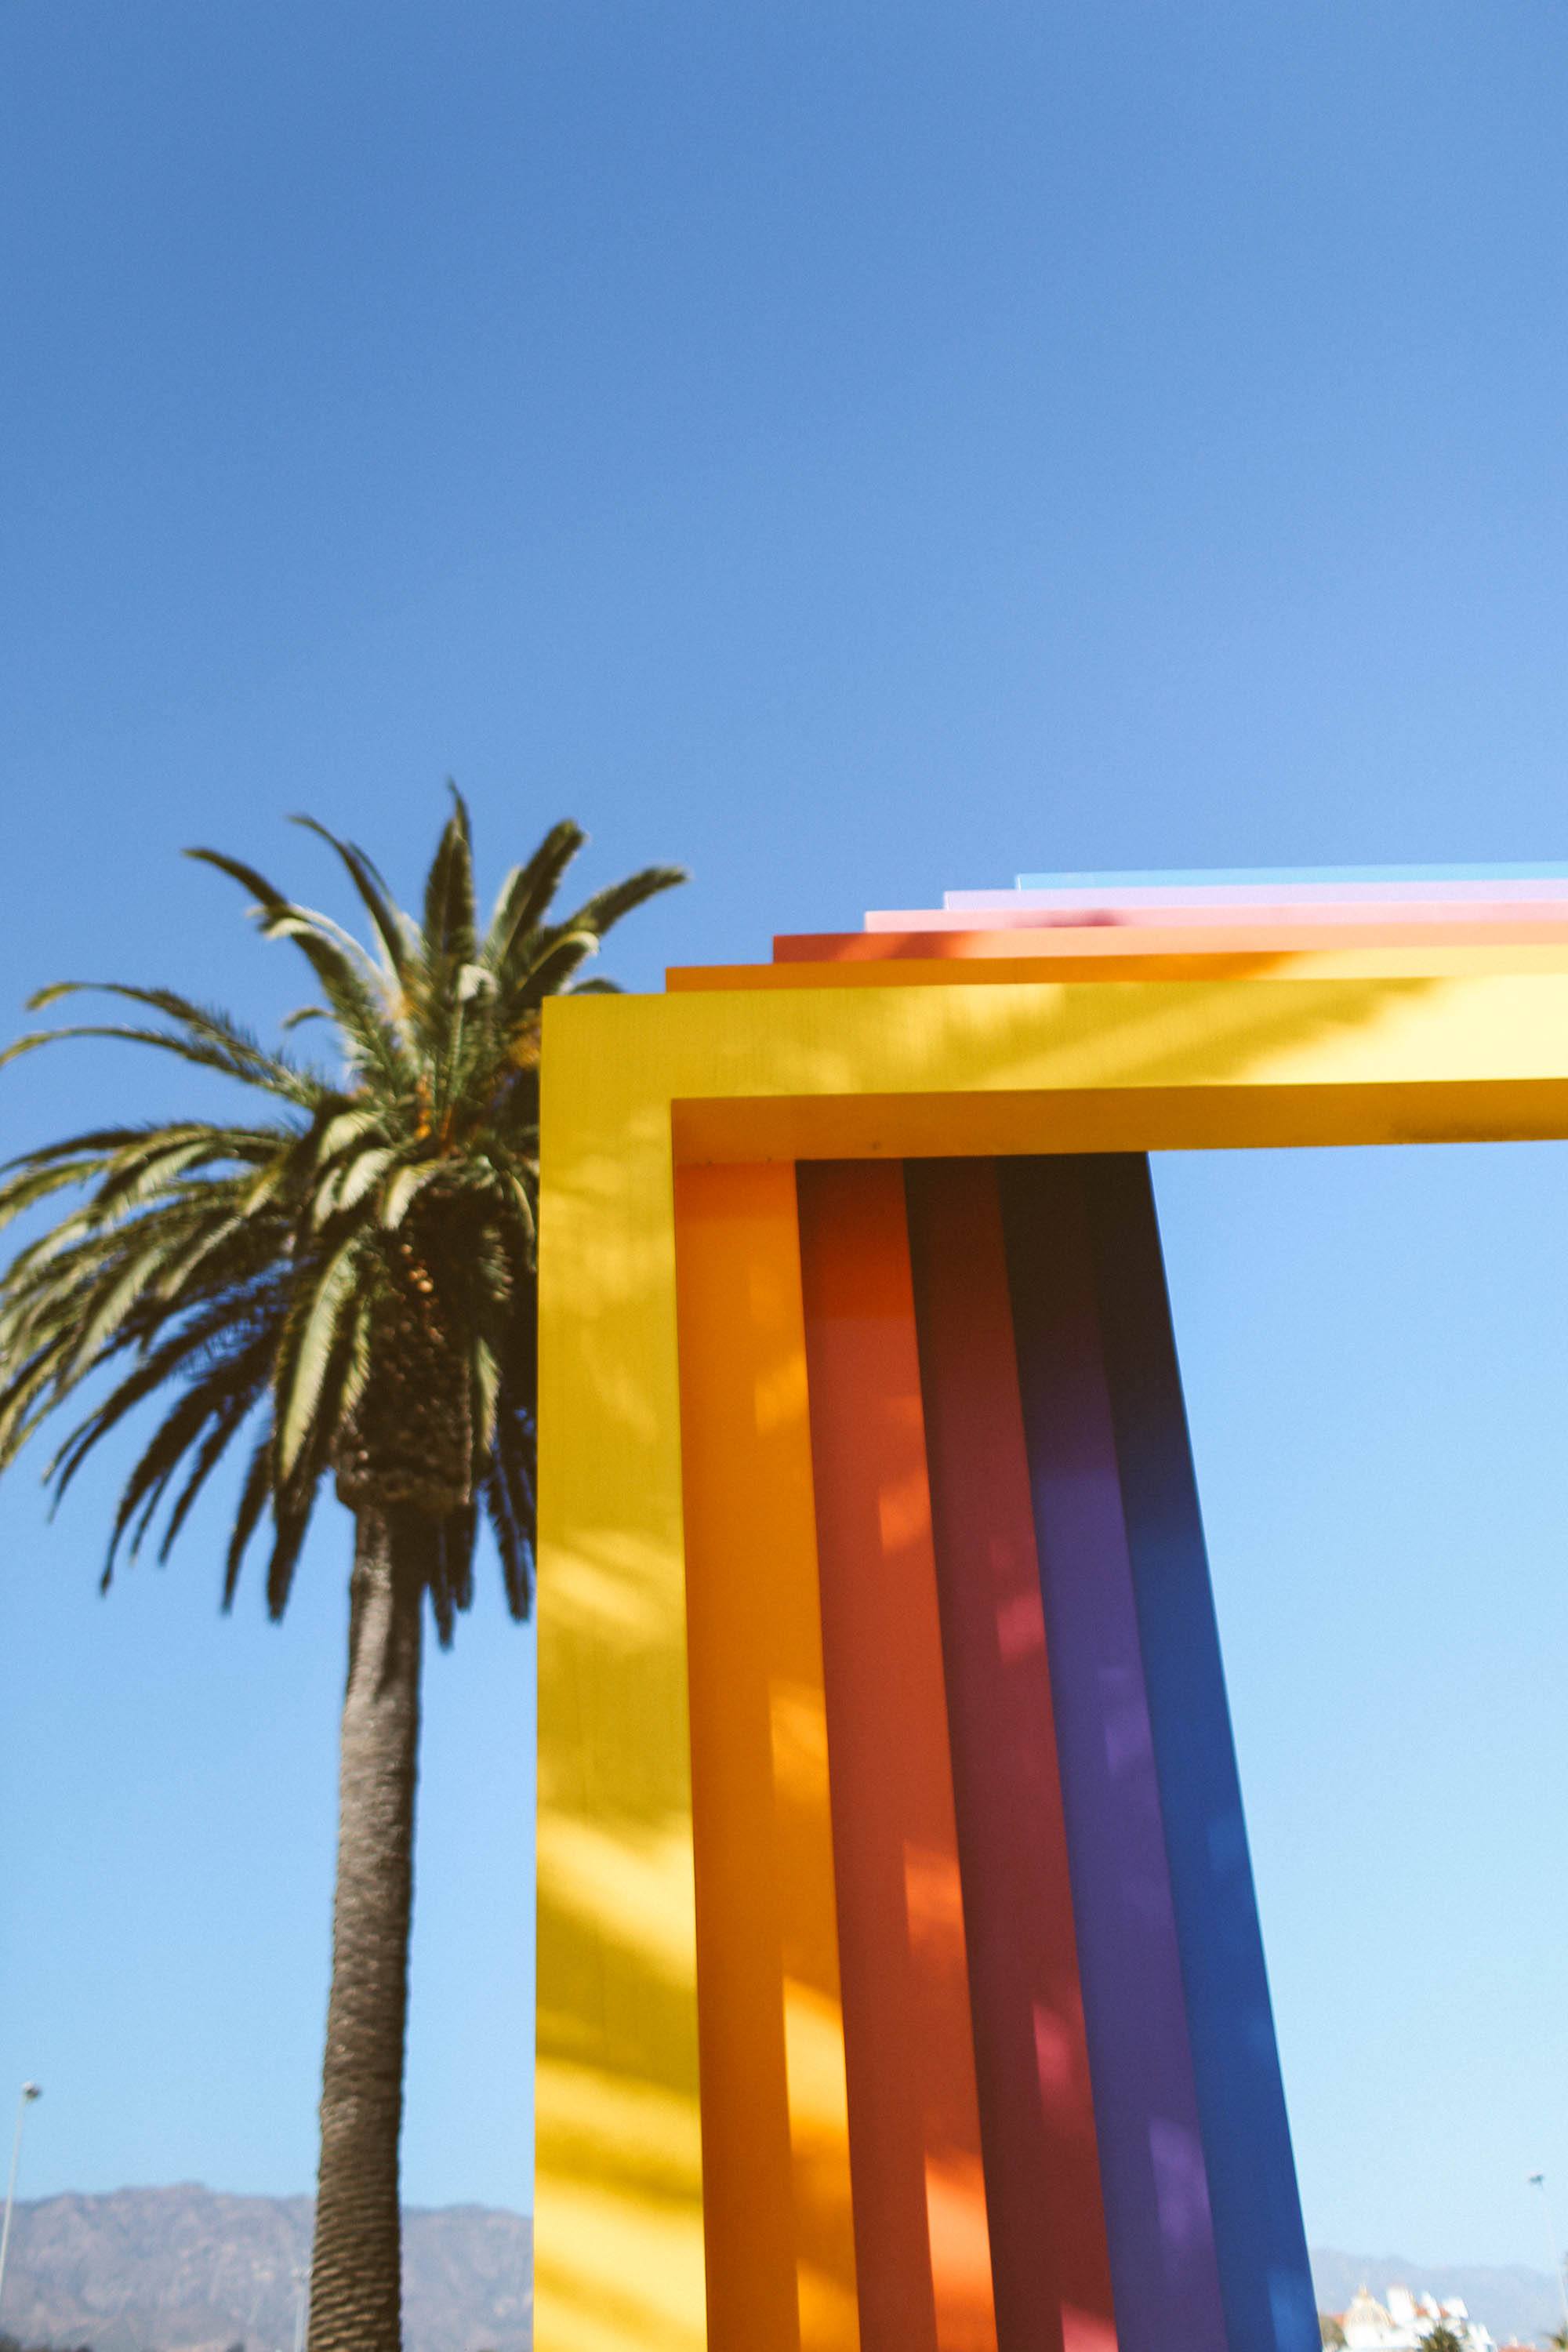 The Chromatic gate and a Palm Tree in Santa Barbara